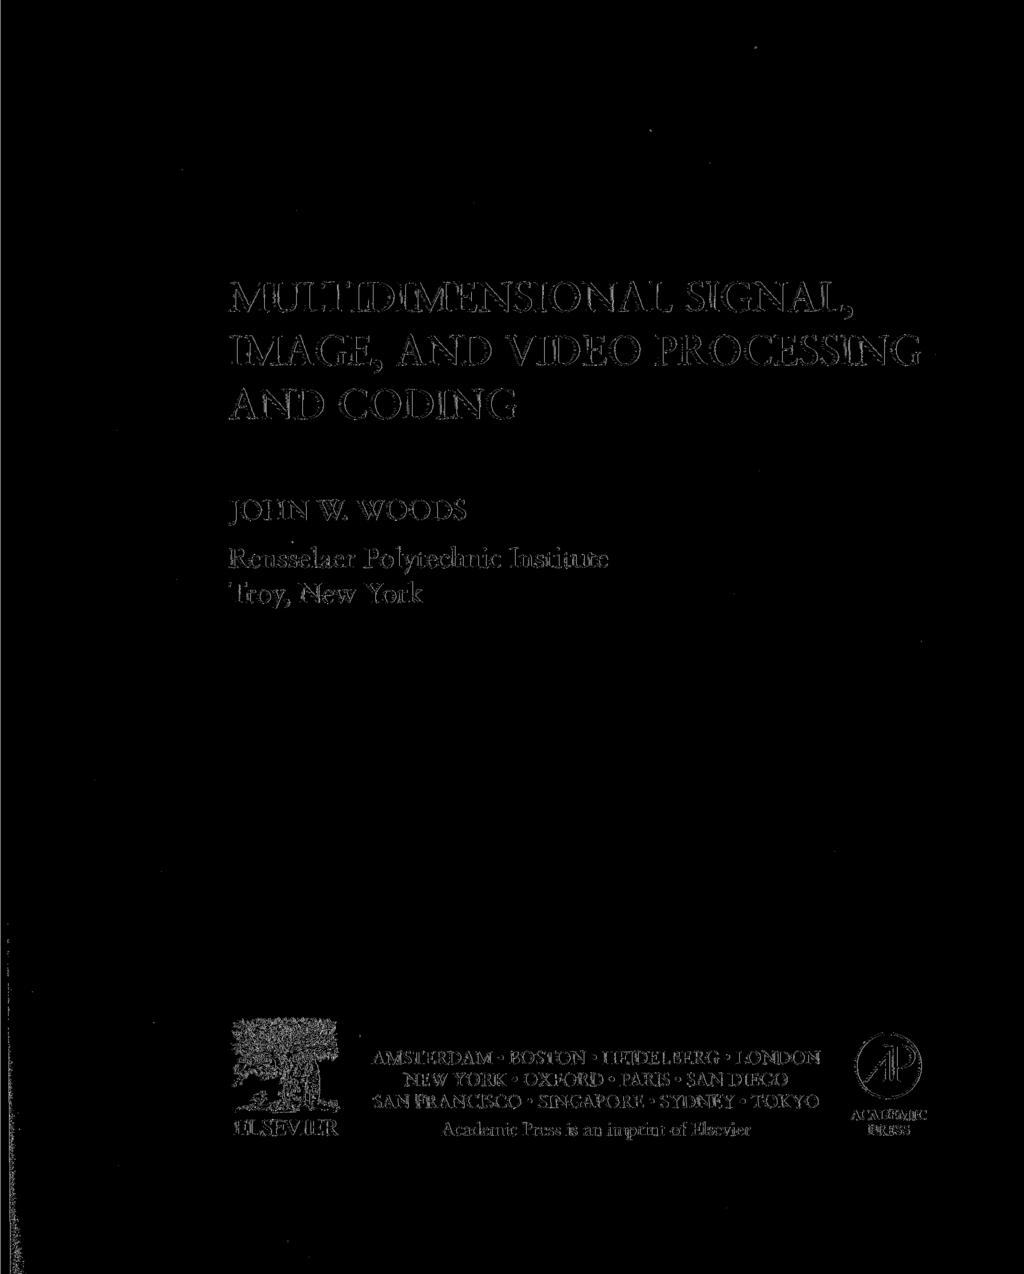 MULTIDIMENSIONAL SIGNAL, IMAGE, AND VIDEO PROCESSING AND CODING JOHN W. WOODS Rensselaer Polytechnic Institute Troy, New York»iBllfllfiii.. i.